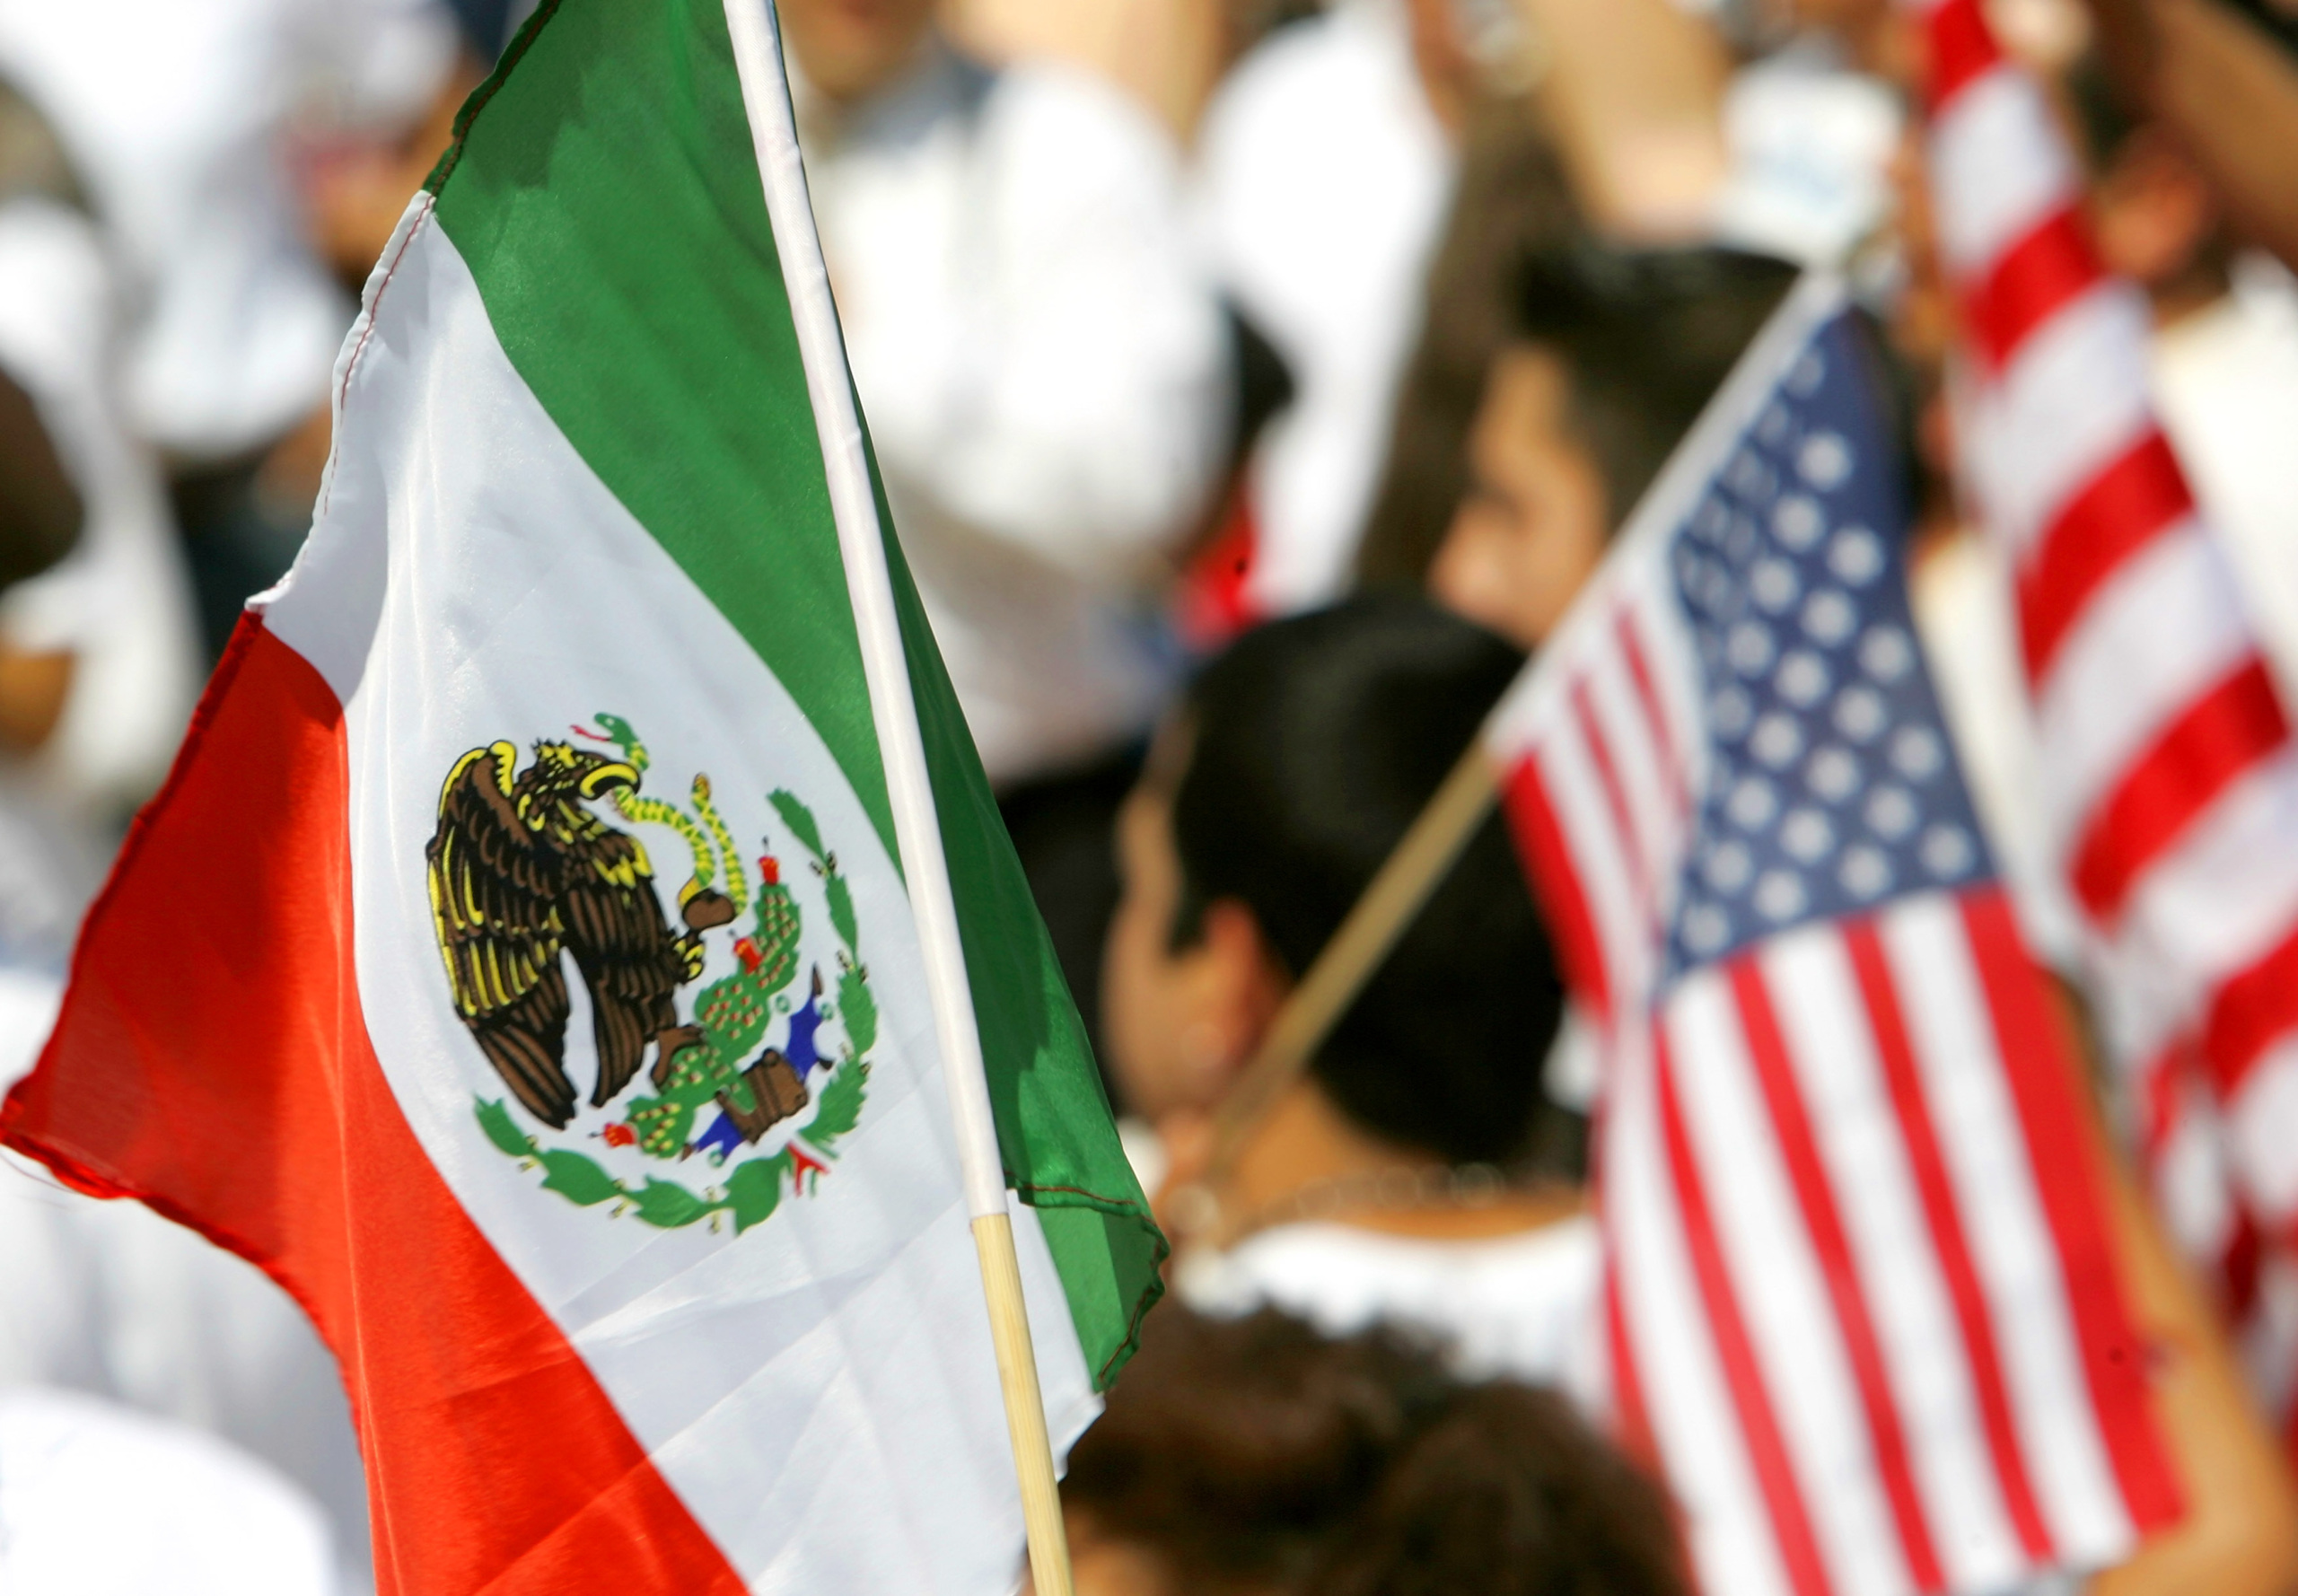 Most in the US see Mexico as a partner despite border problems, an